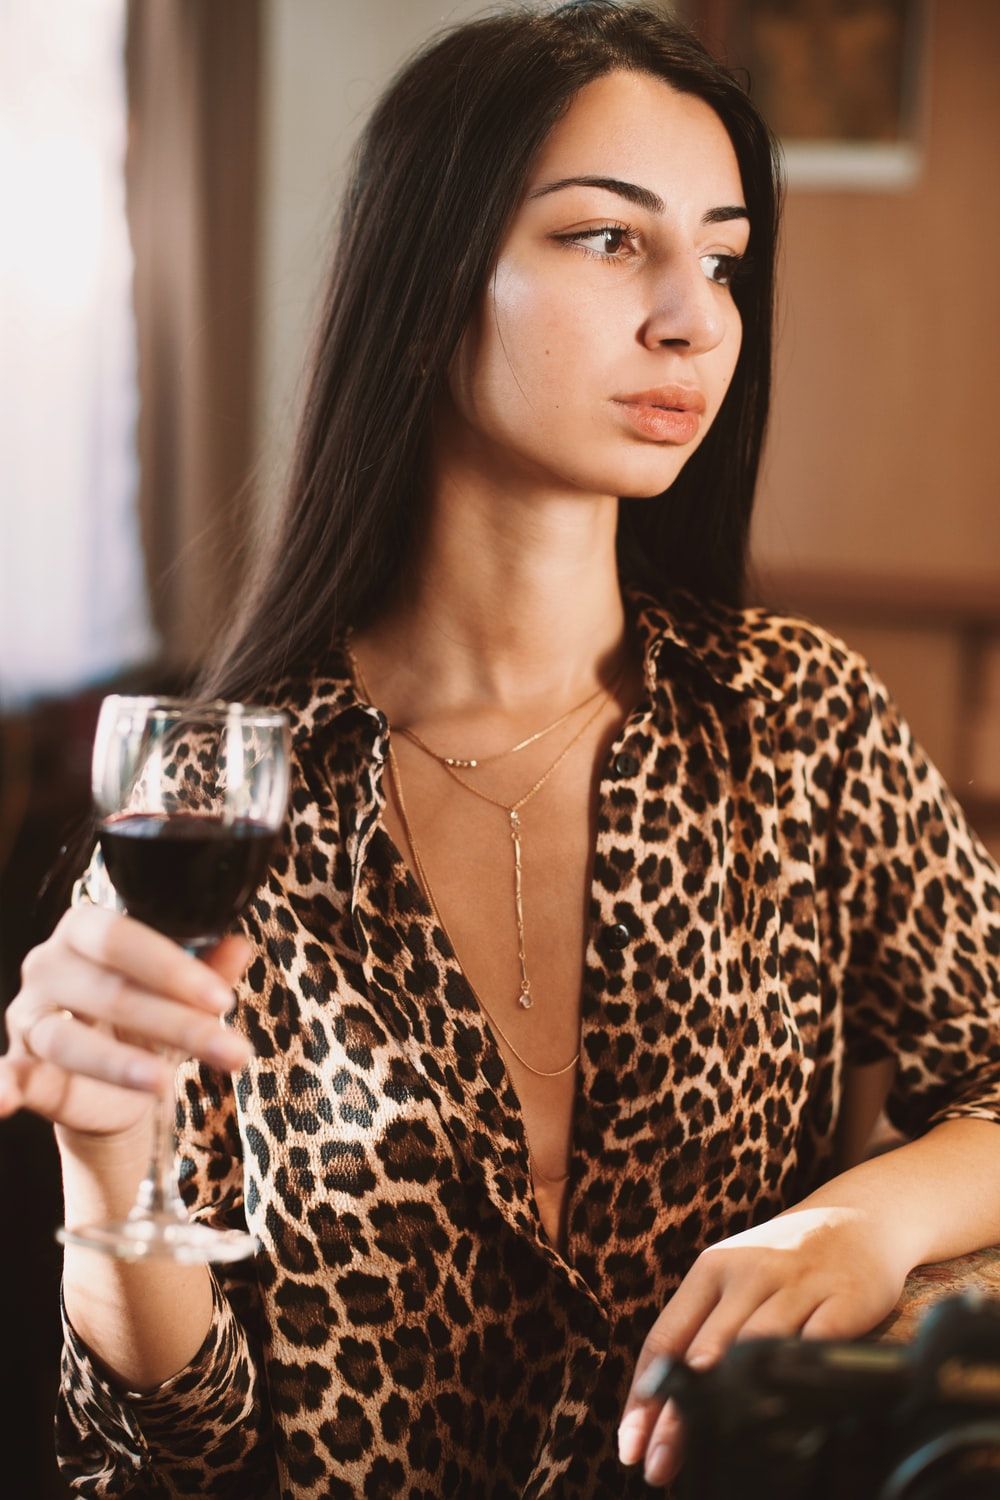 Women Drinking Wine Picture. Download Free Image